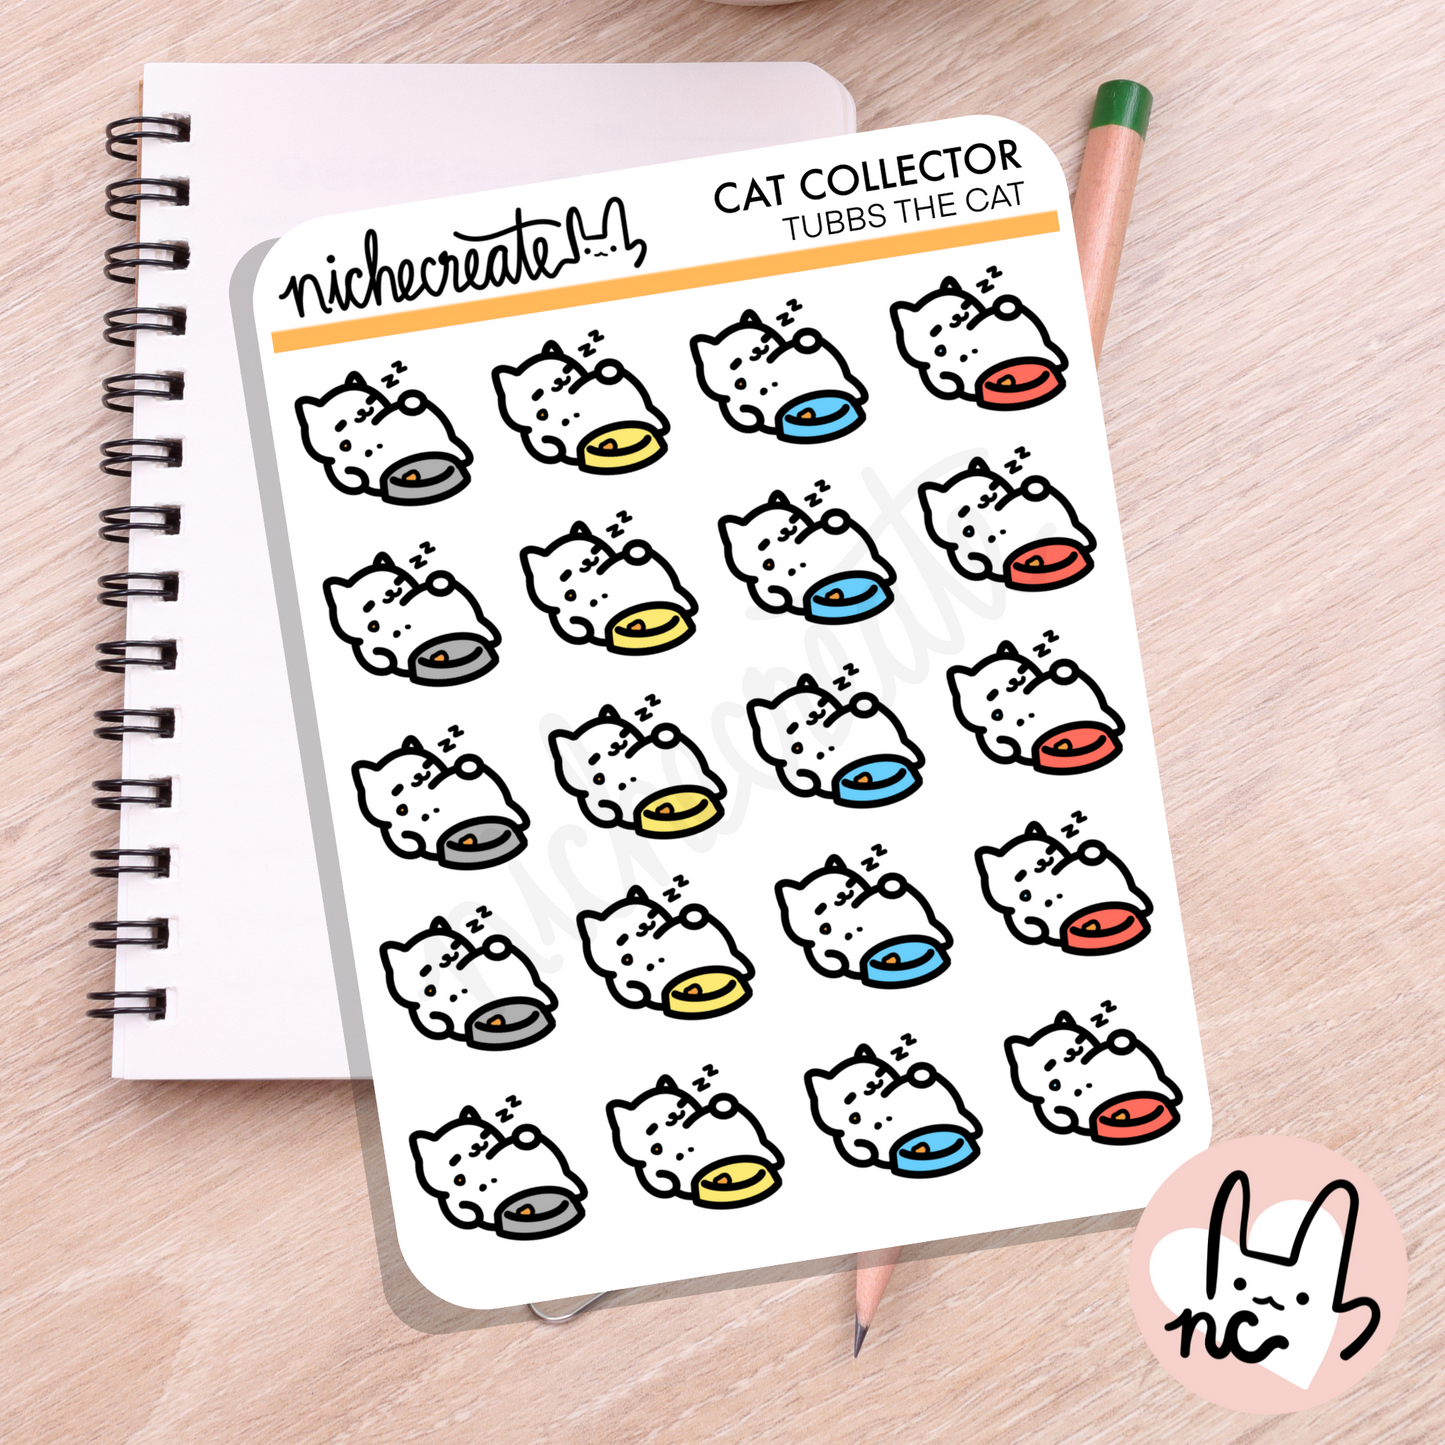 Tubbs the Cat - Cat Collector Planner Sticker Sheets (Inspired Art)